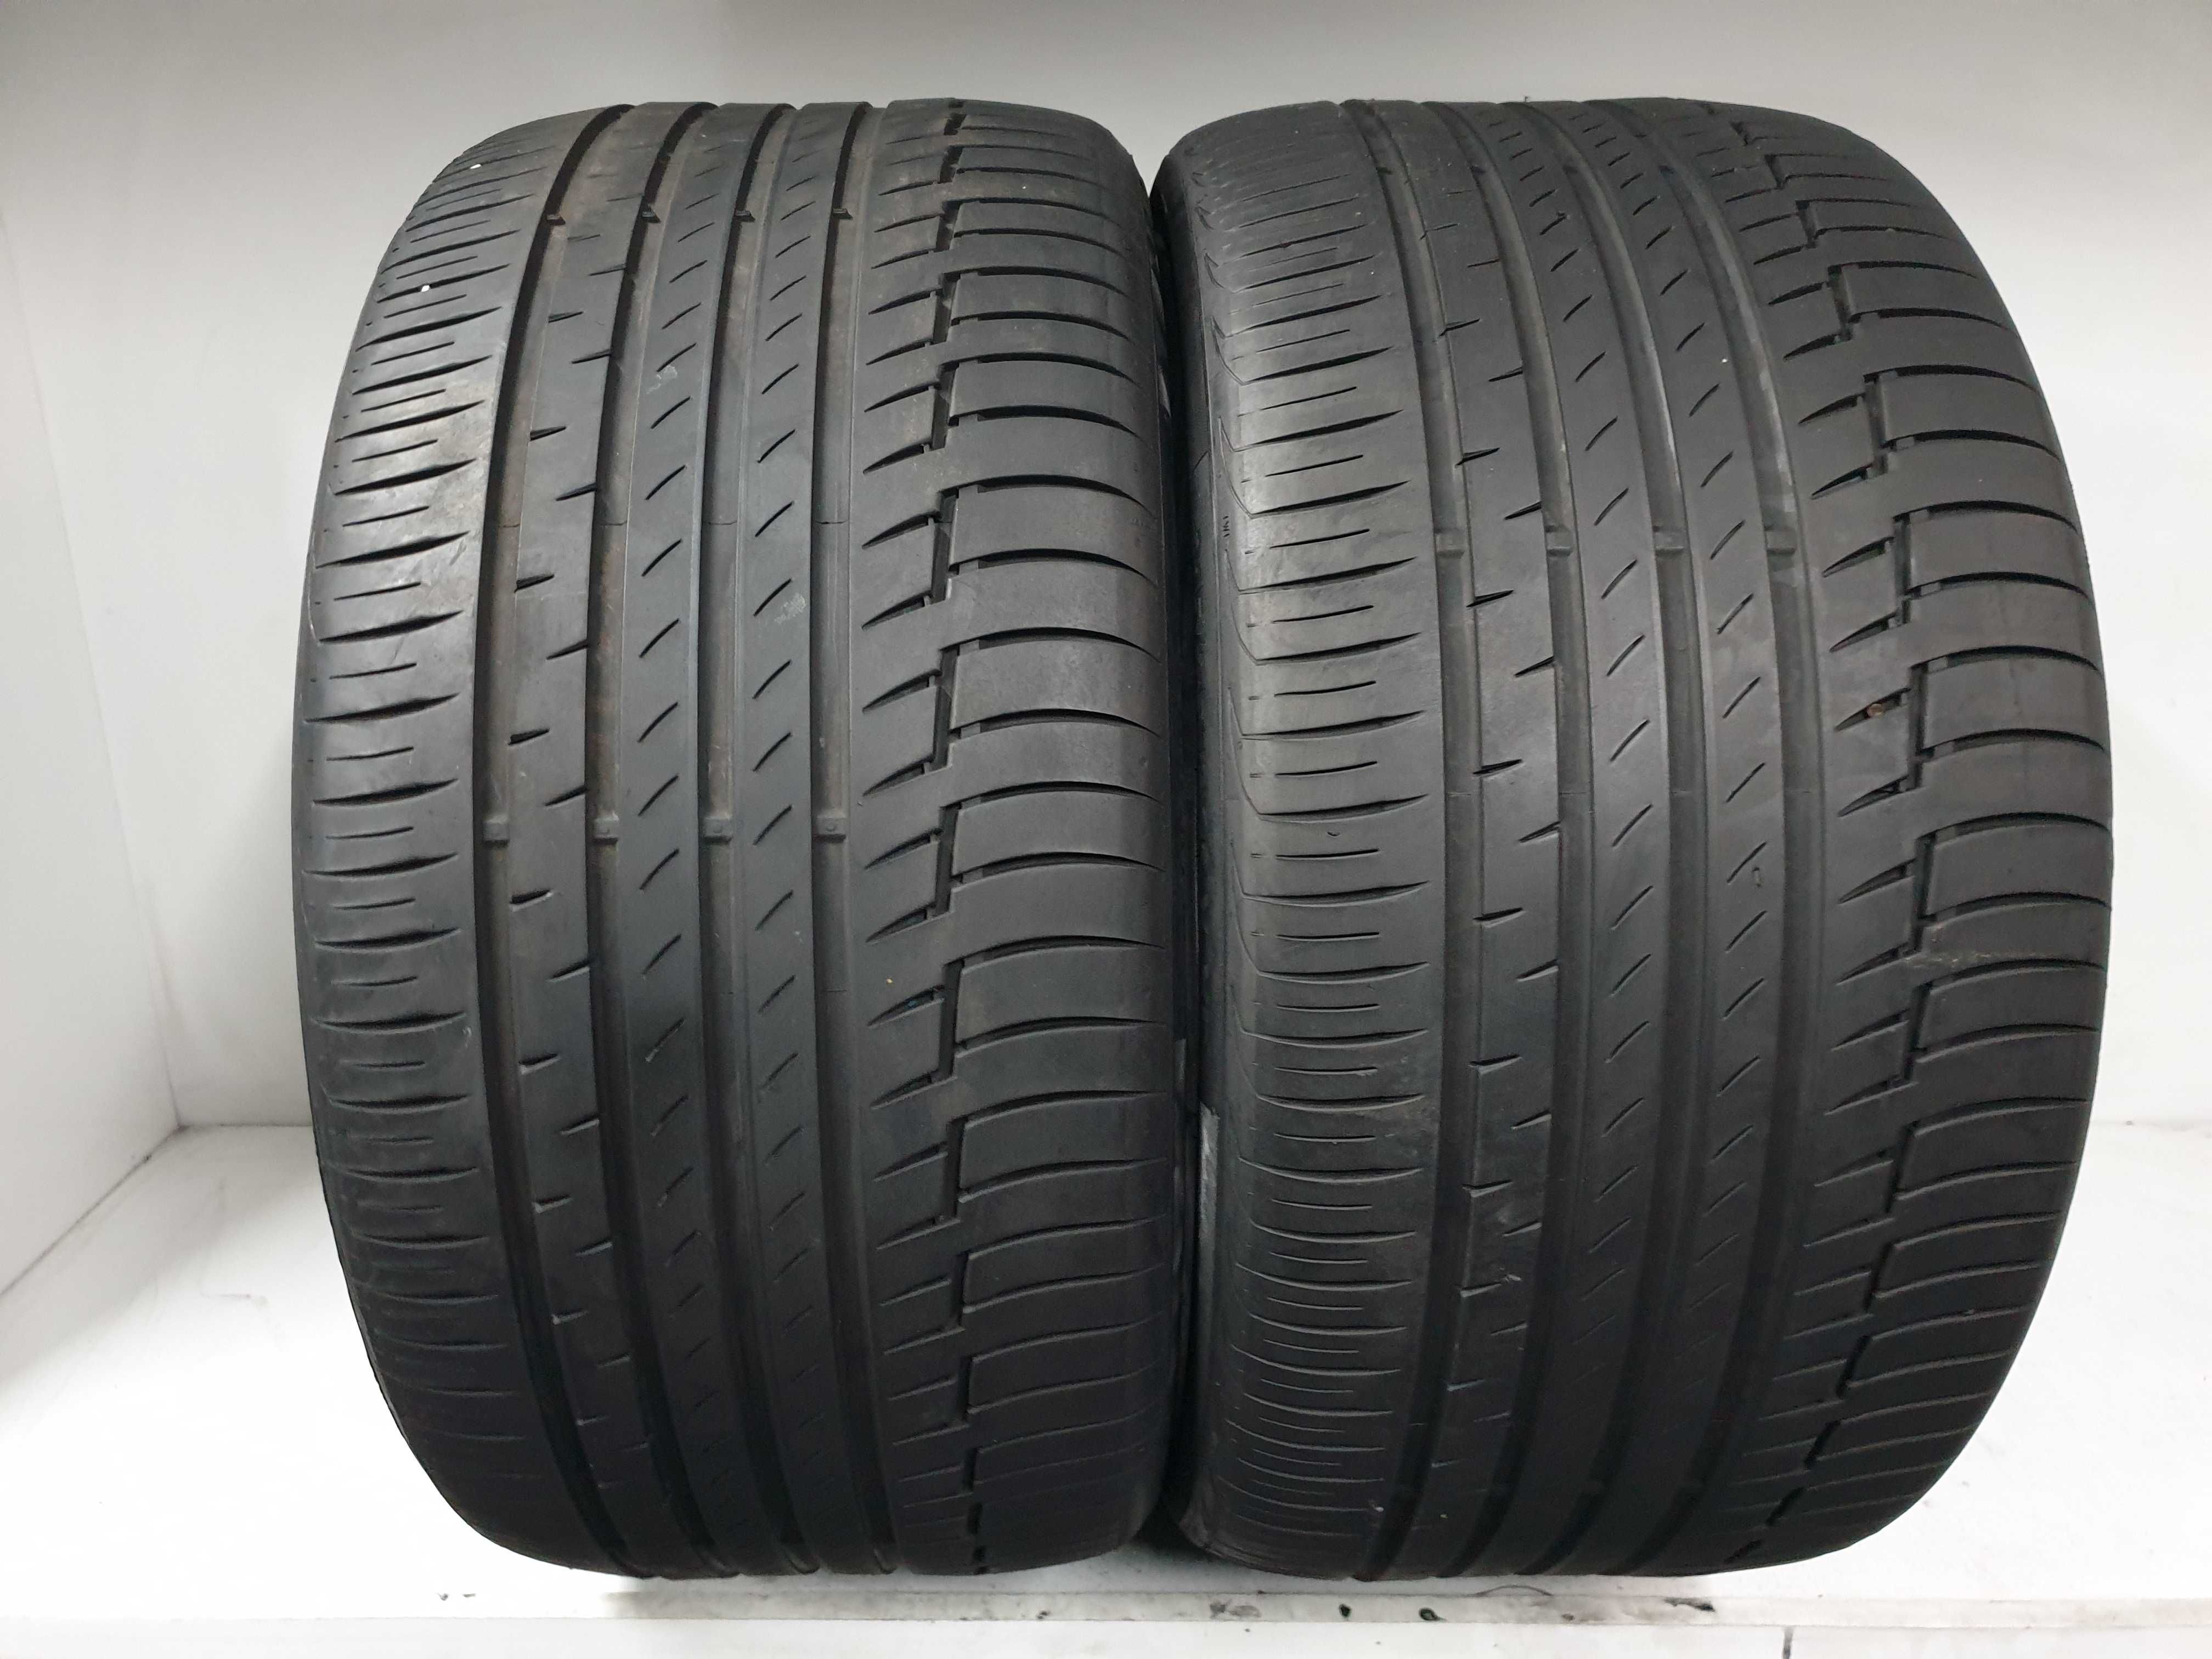 Anvelope Second Hand Continental Vara-315/35 R21 111Y,in stoc R20/22